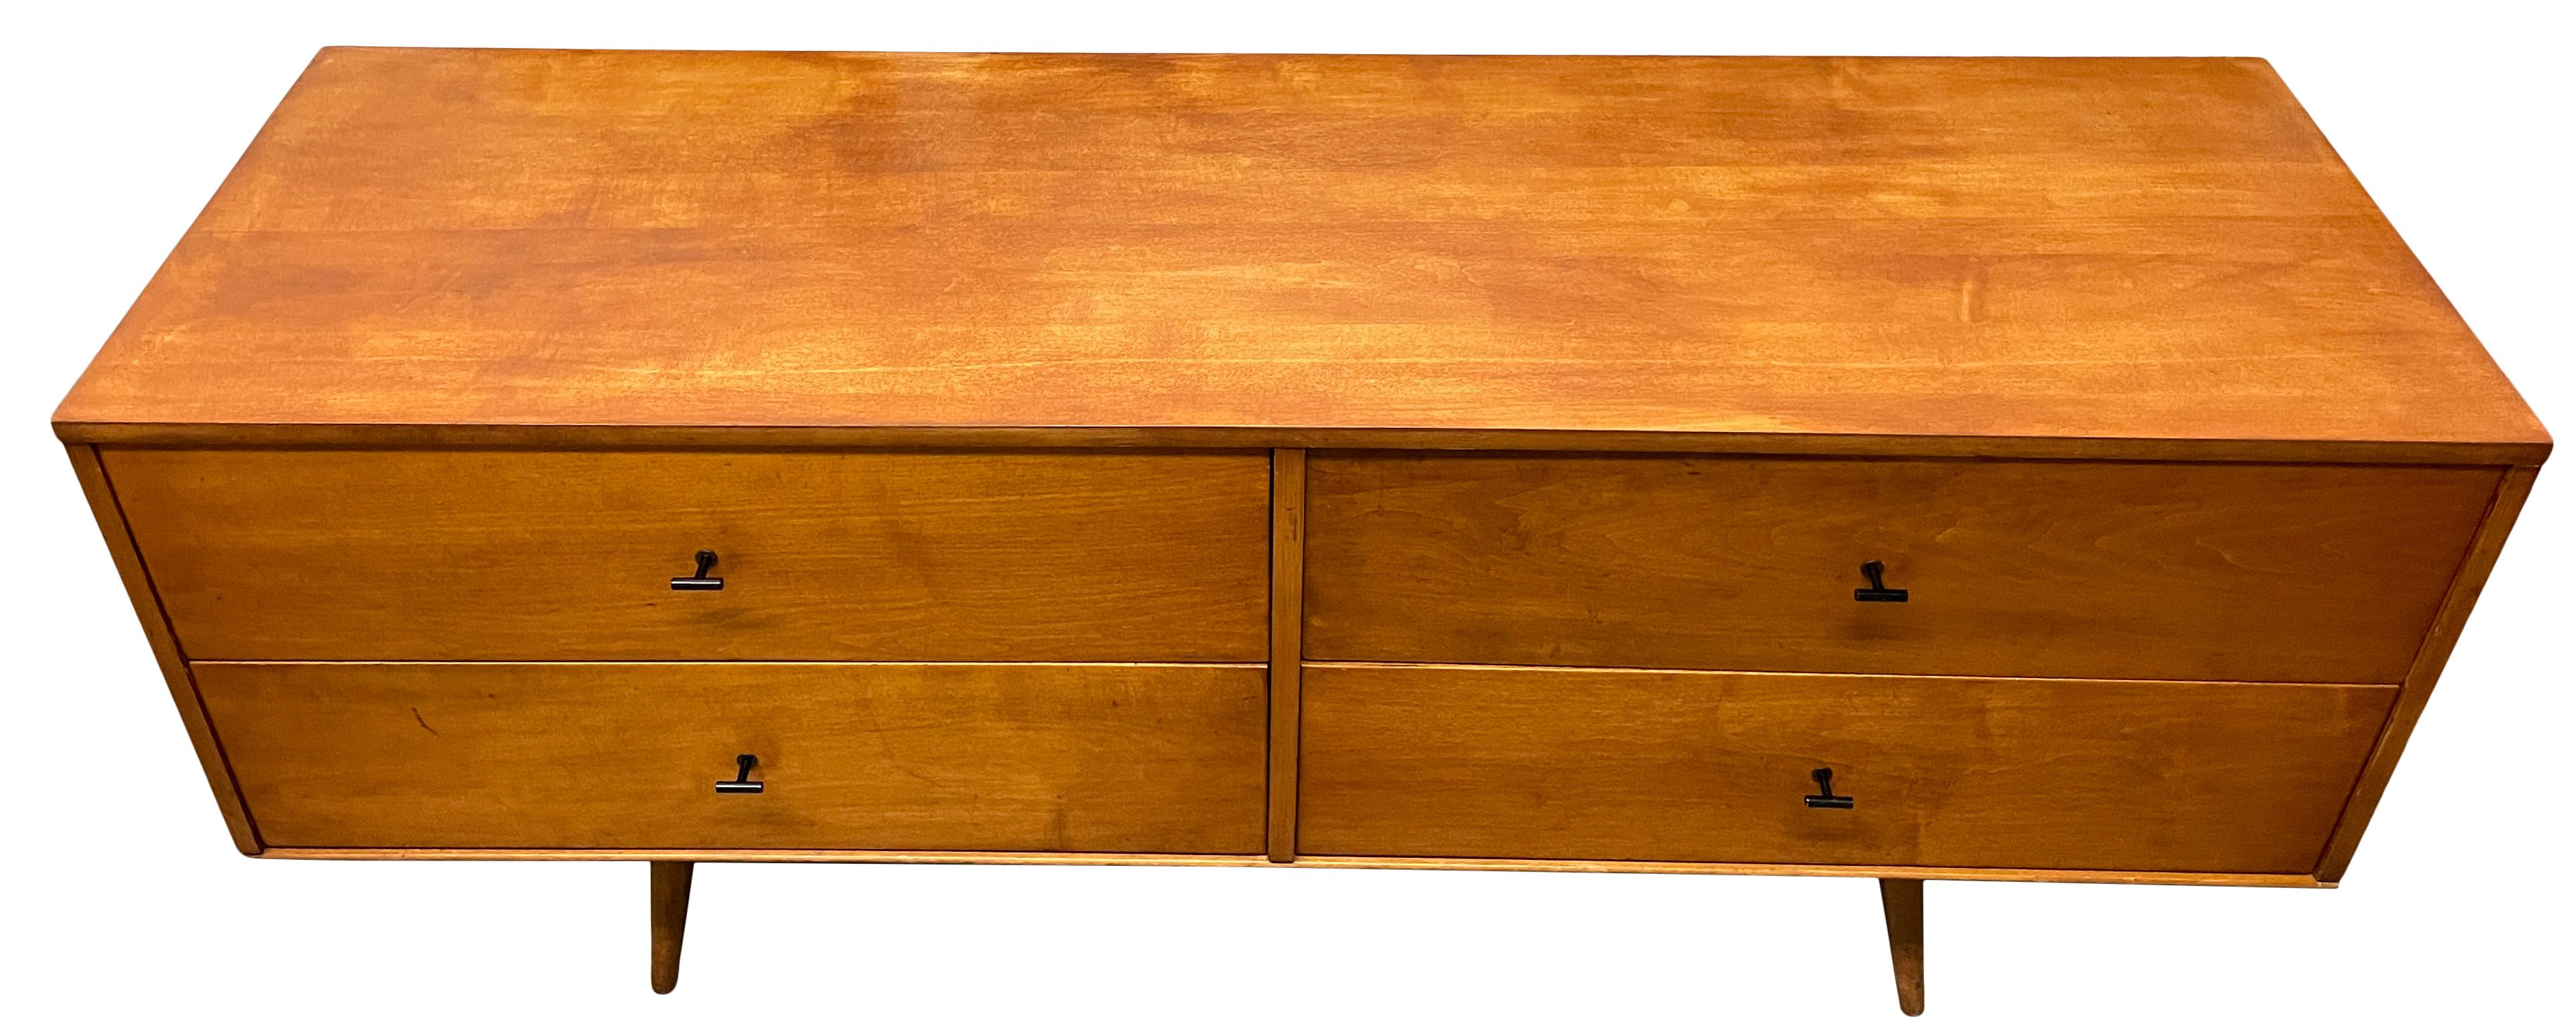 Rare midcentury low dresser credenza by Paul McCobb circa 1950 Planner Group #1504 with 4 low drawers - solid maple construction has a tobacco blonde maple lacquered finish. All original Black Steel T Pulls. Sits on a 60